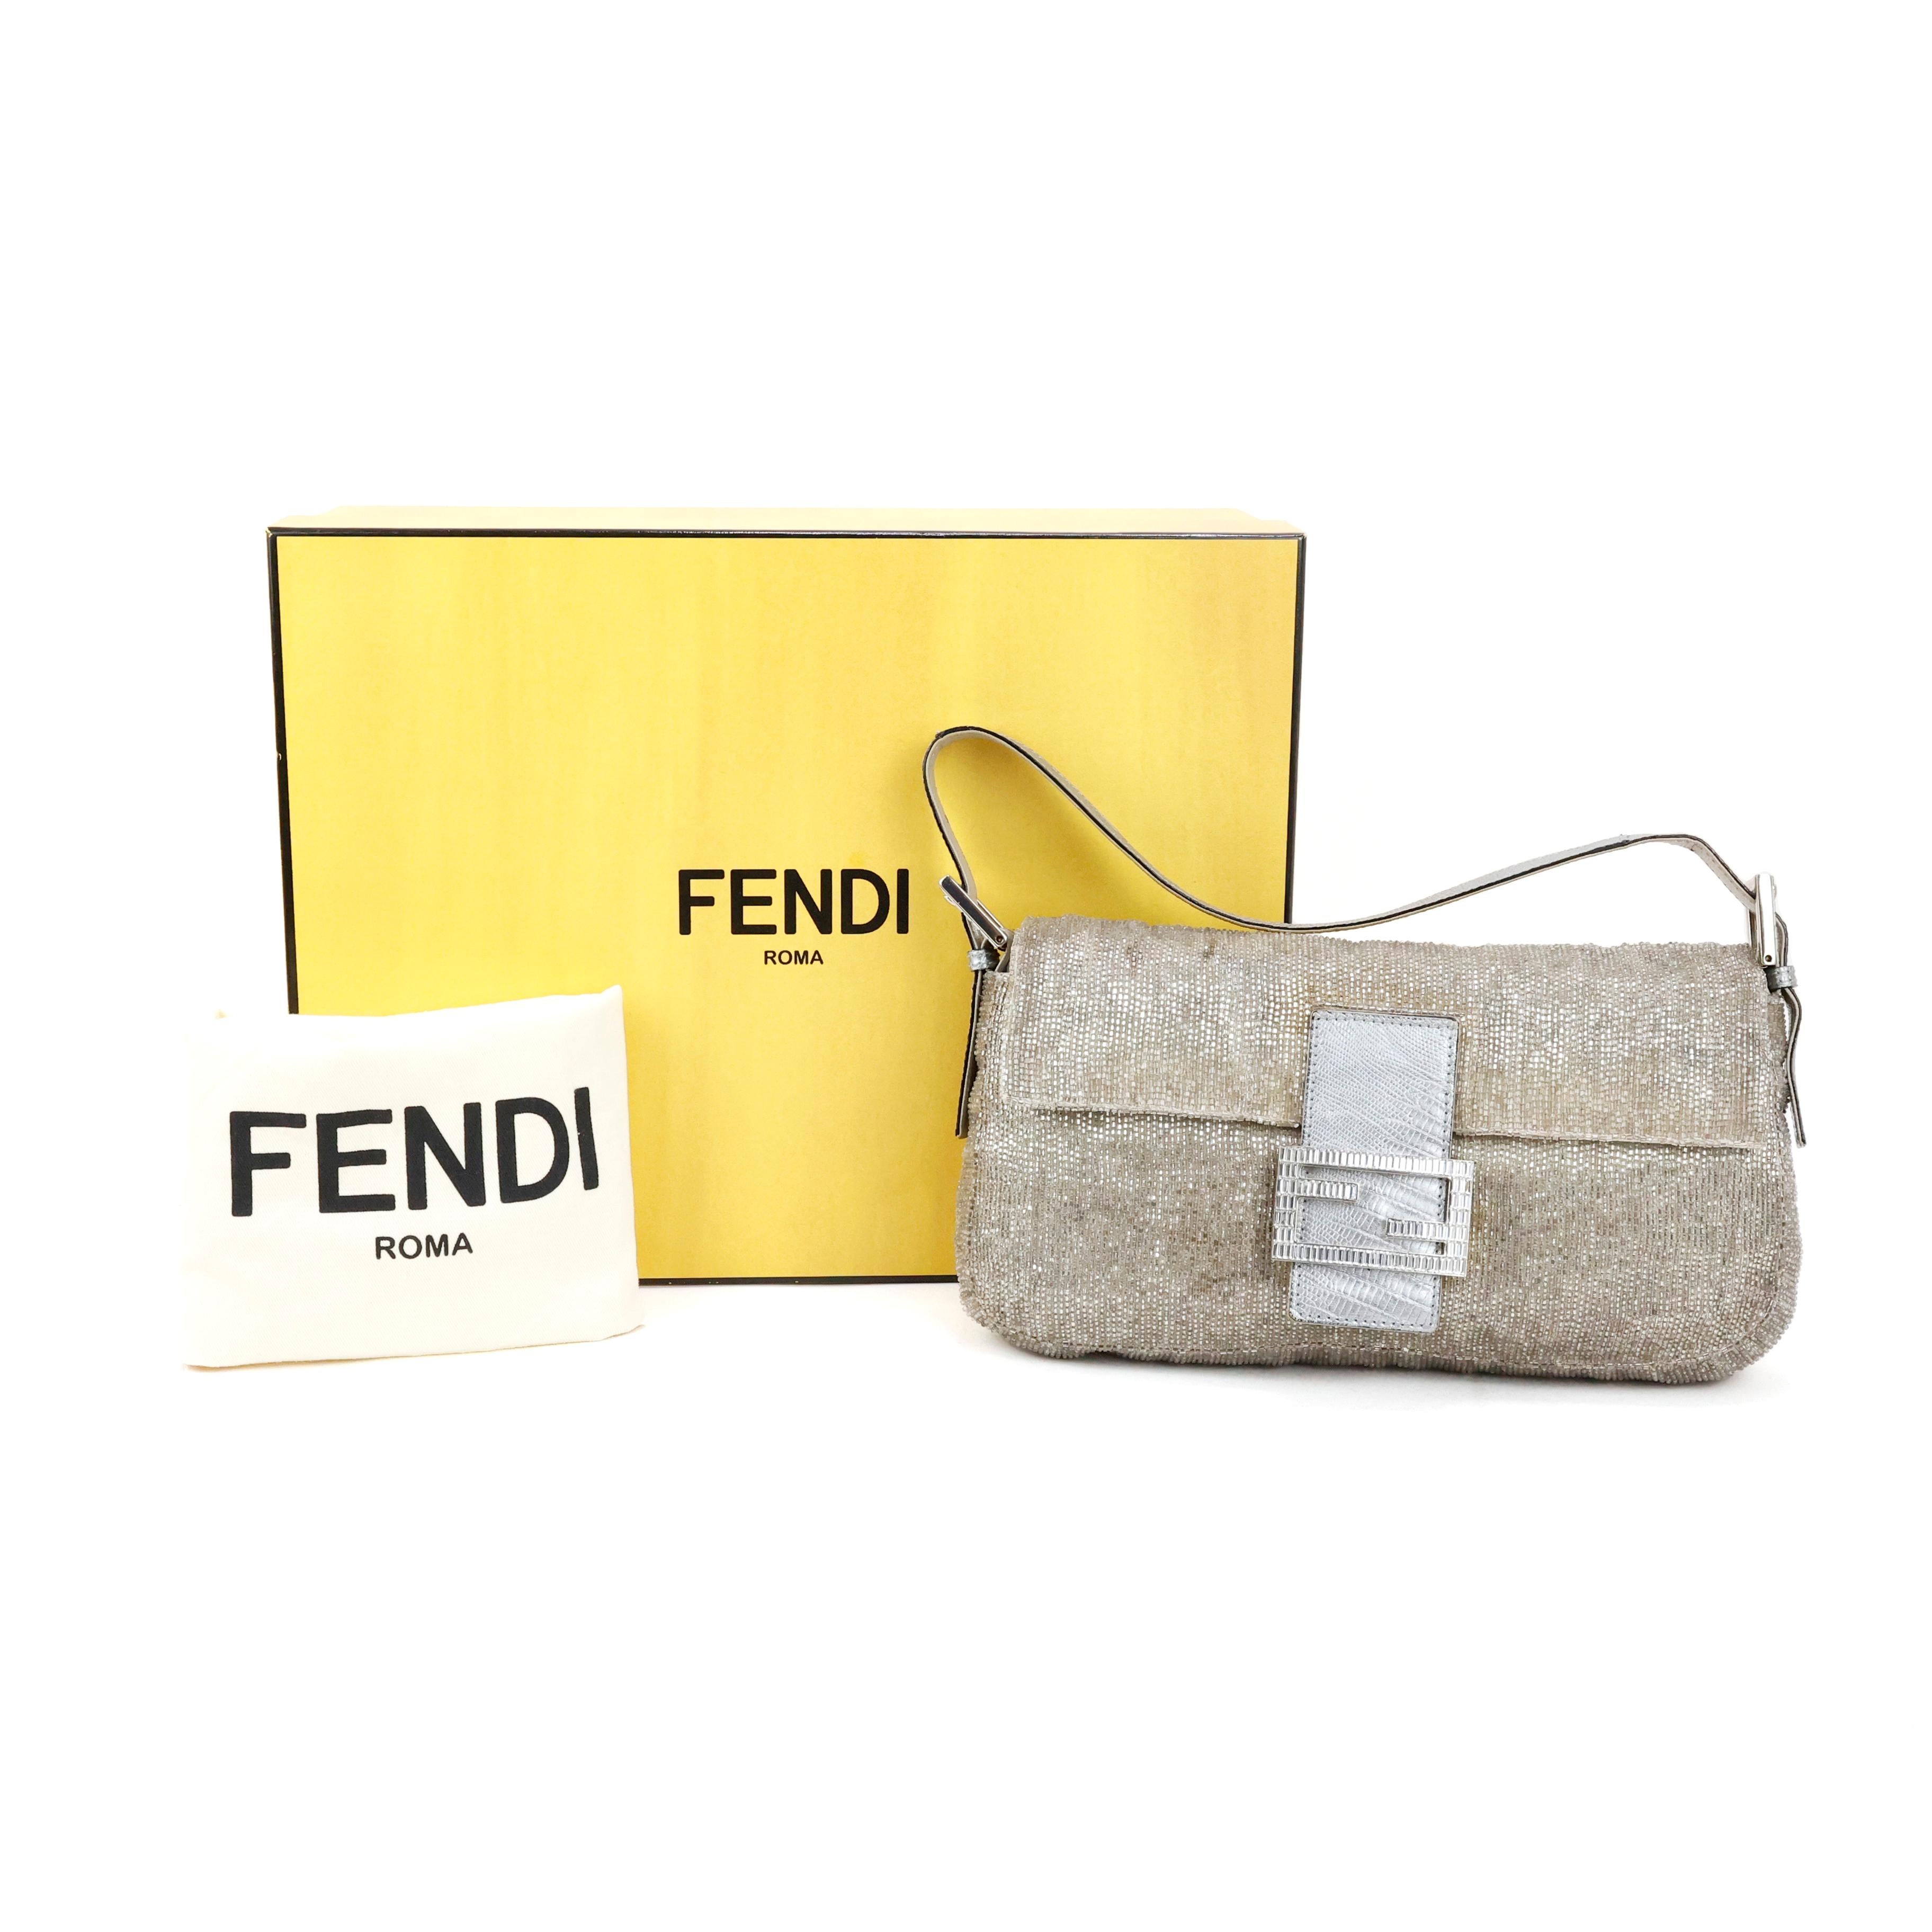 Rare Fendi Crystal Embellished Baguette with Lizard Leather For Sale 1